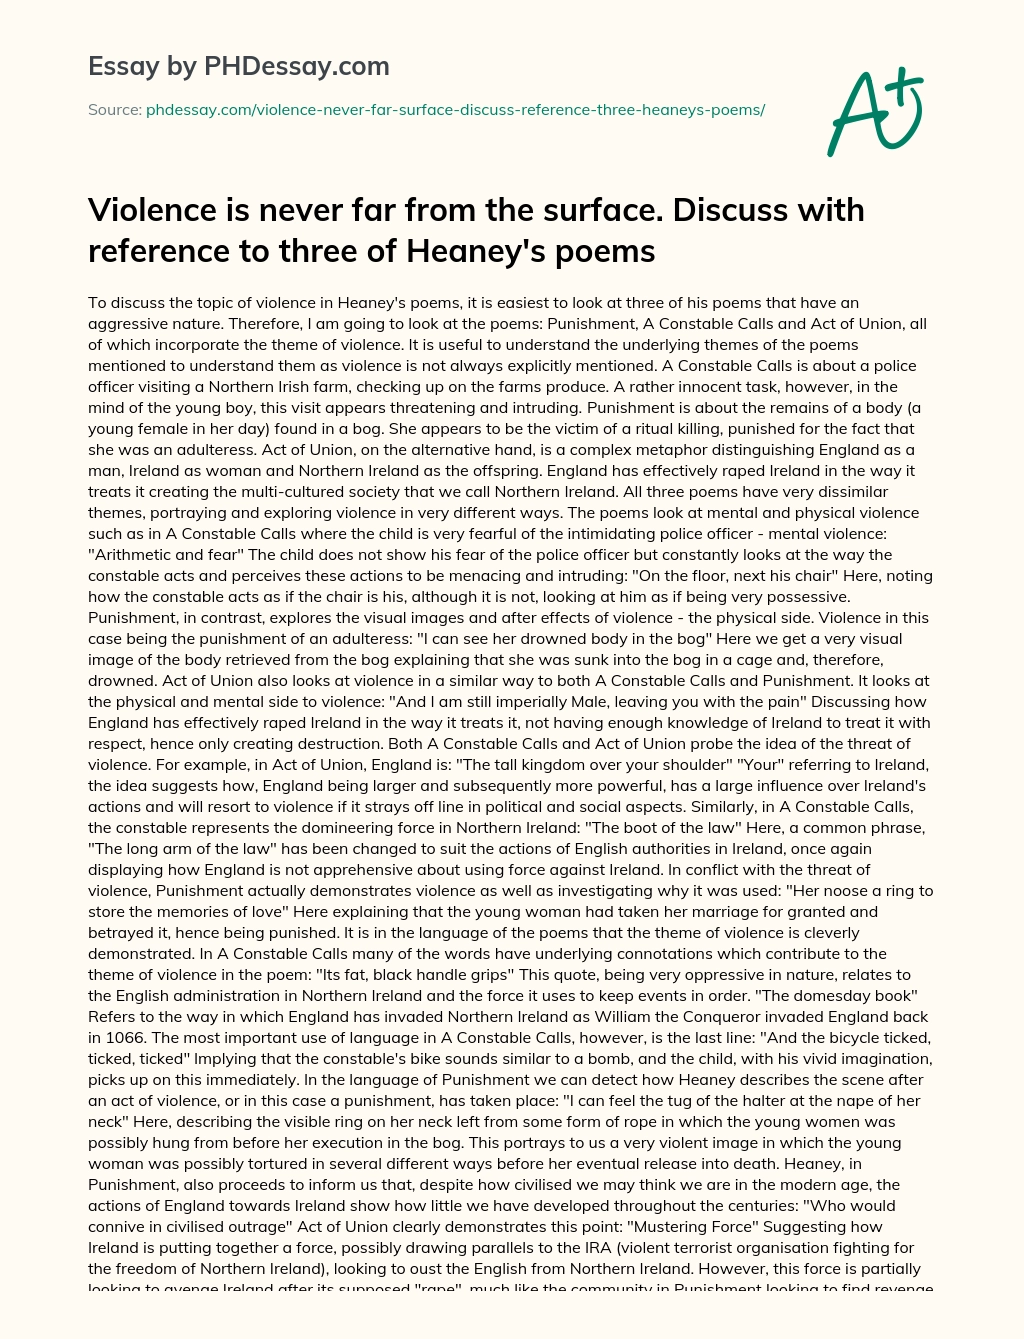 Violence is never far from the surface. Discuss with reference to three of Heaney’s poems essay